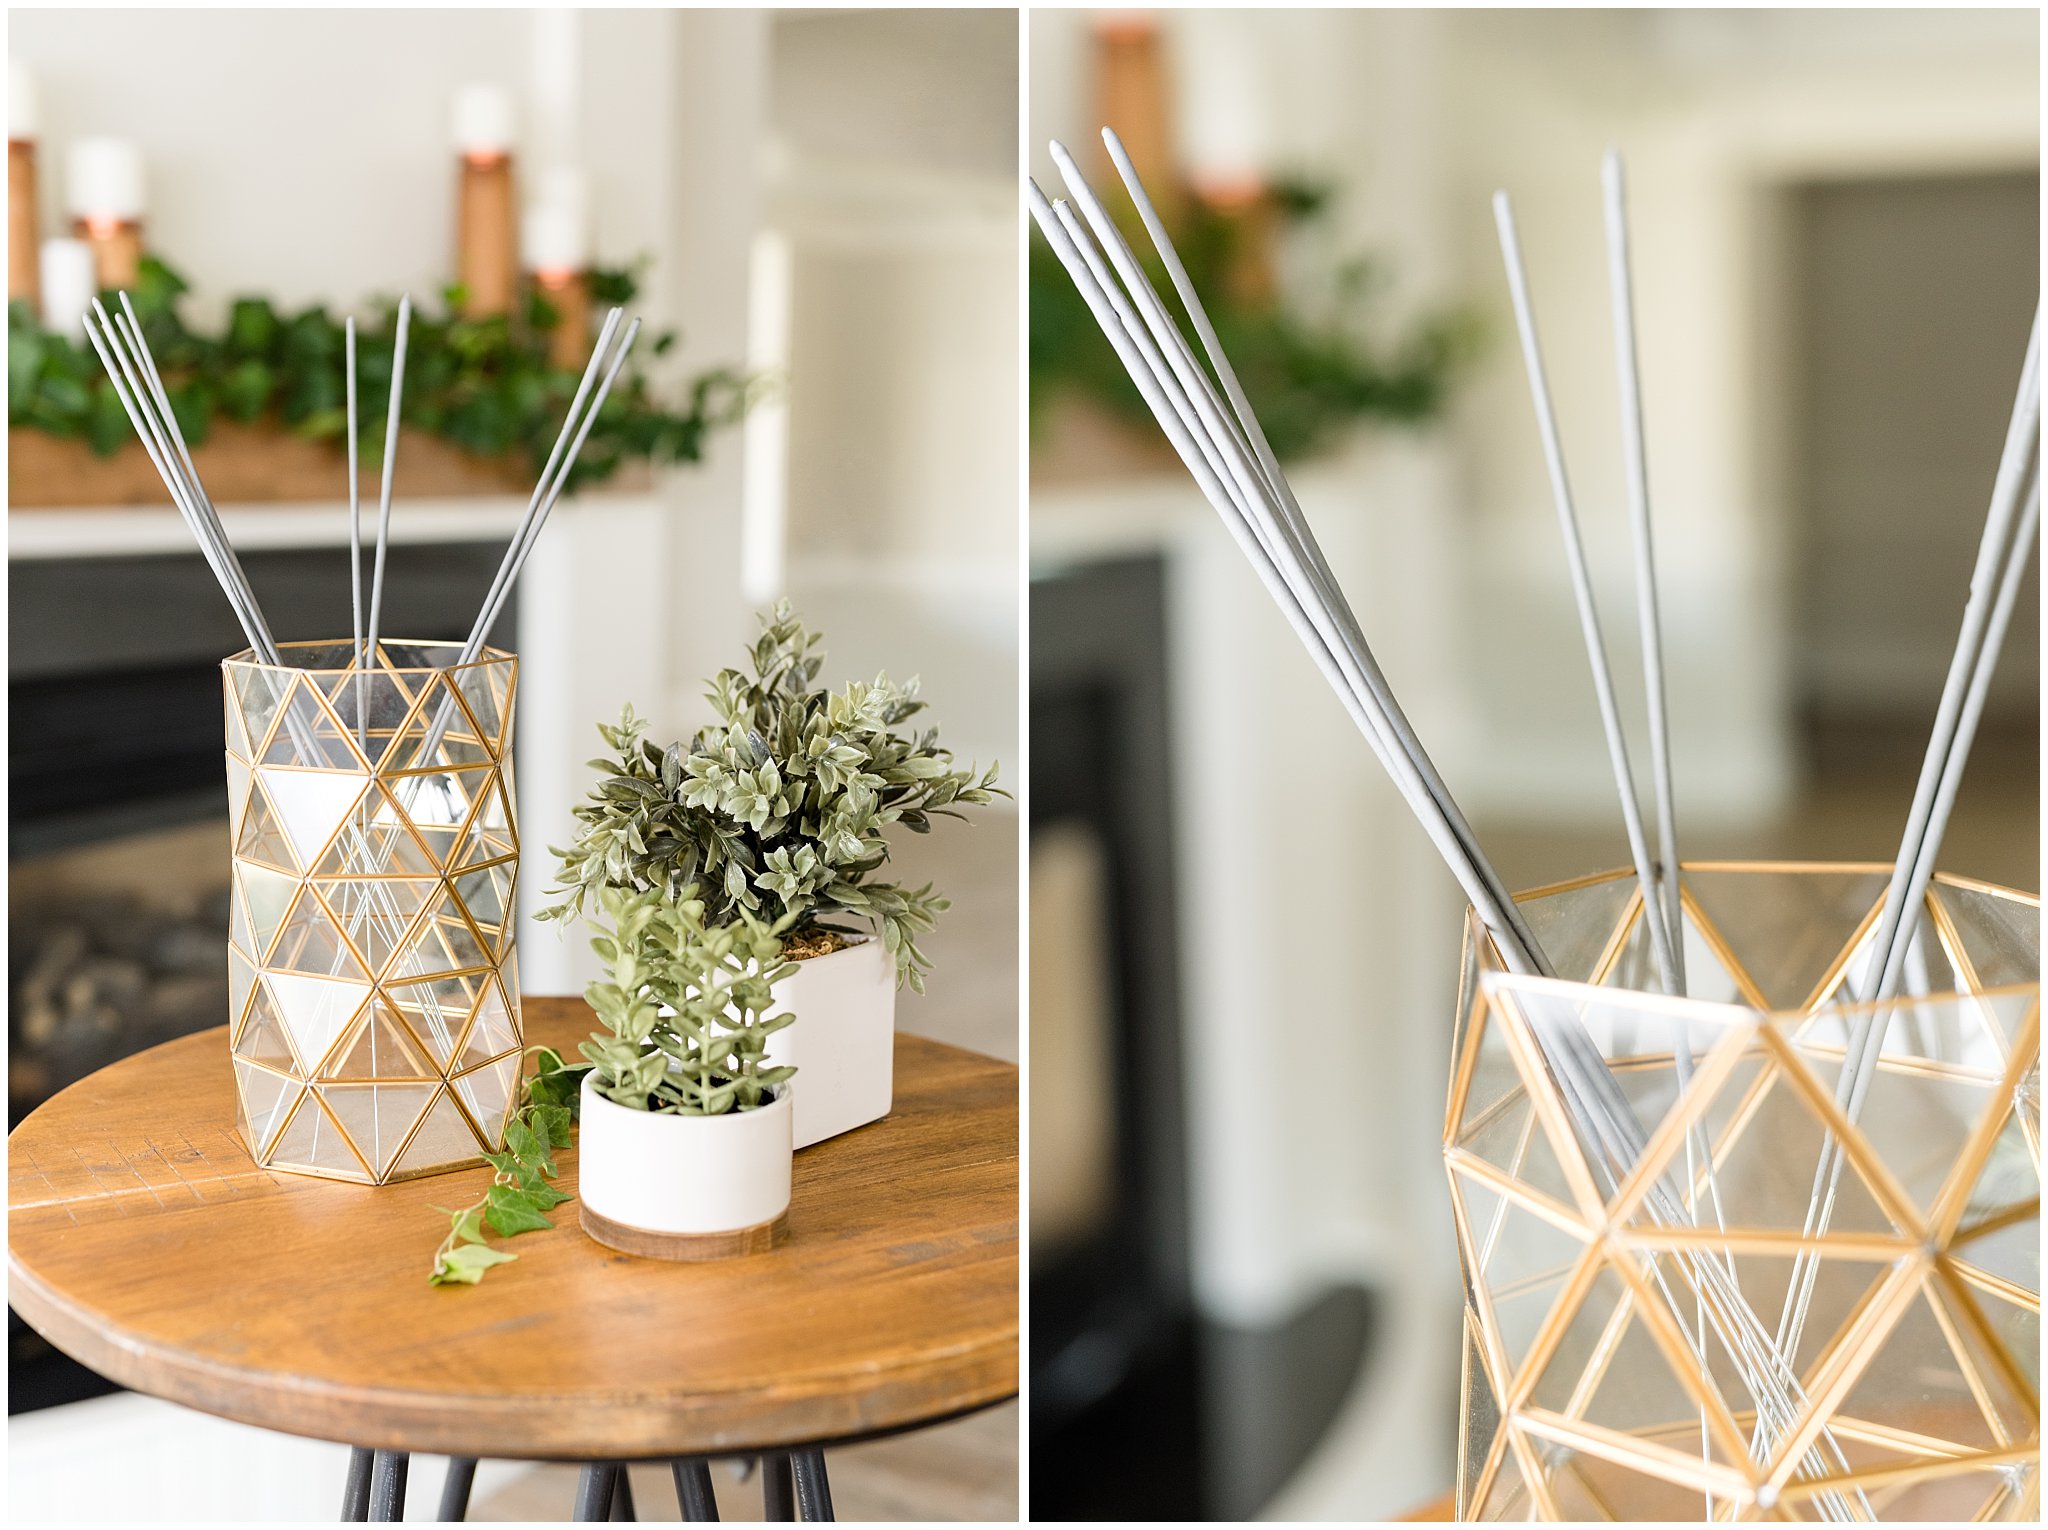 Sparkler wedding reception decor ideas in geometric container | 5 Tips for a Flawless Sparkler Exit | Utah Wedding Photographers | Jessie and Dallin Photography